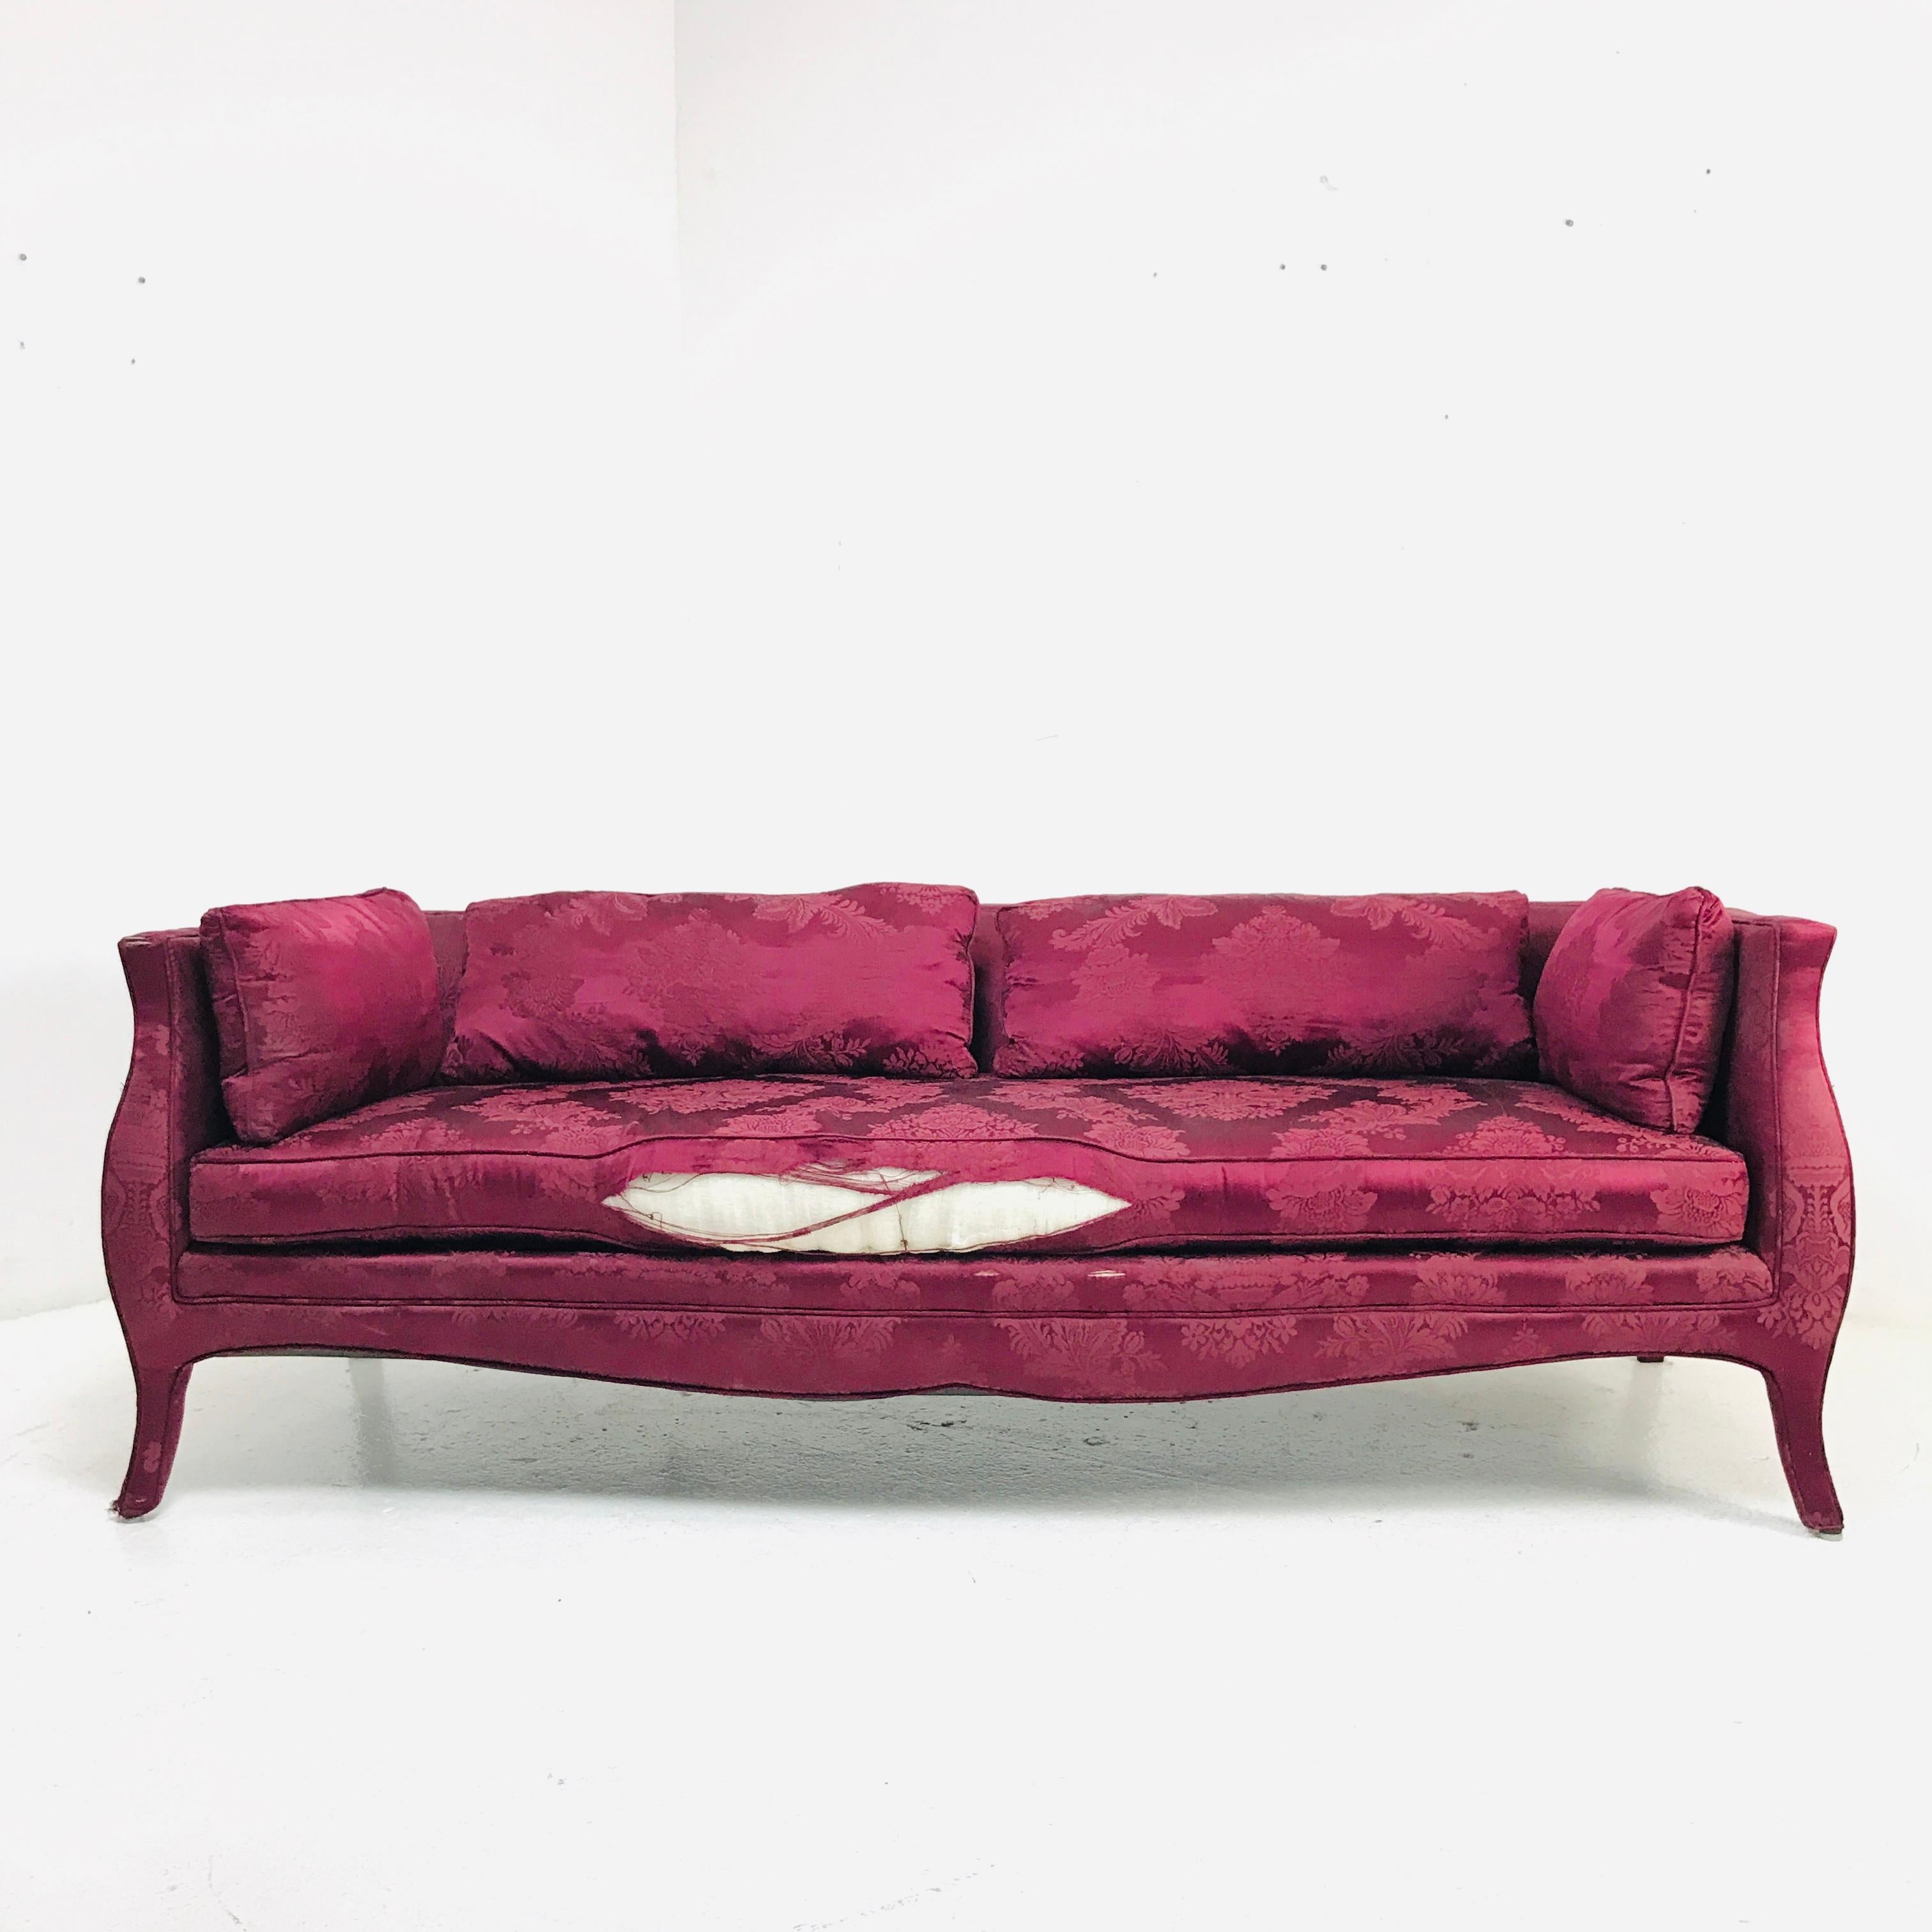 Curvy silhouette Lutece sofa by Richard Himmel.
Re-upholstery required.